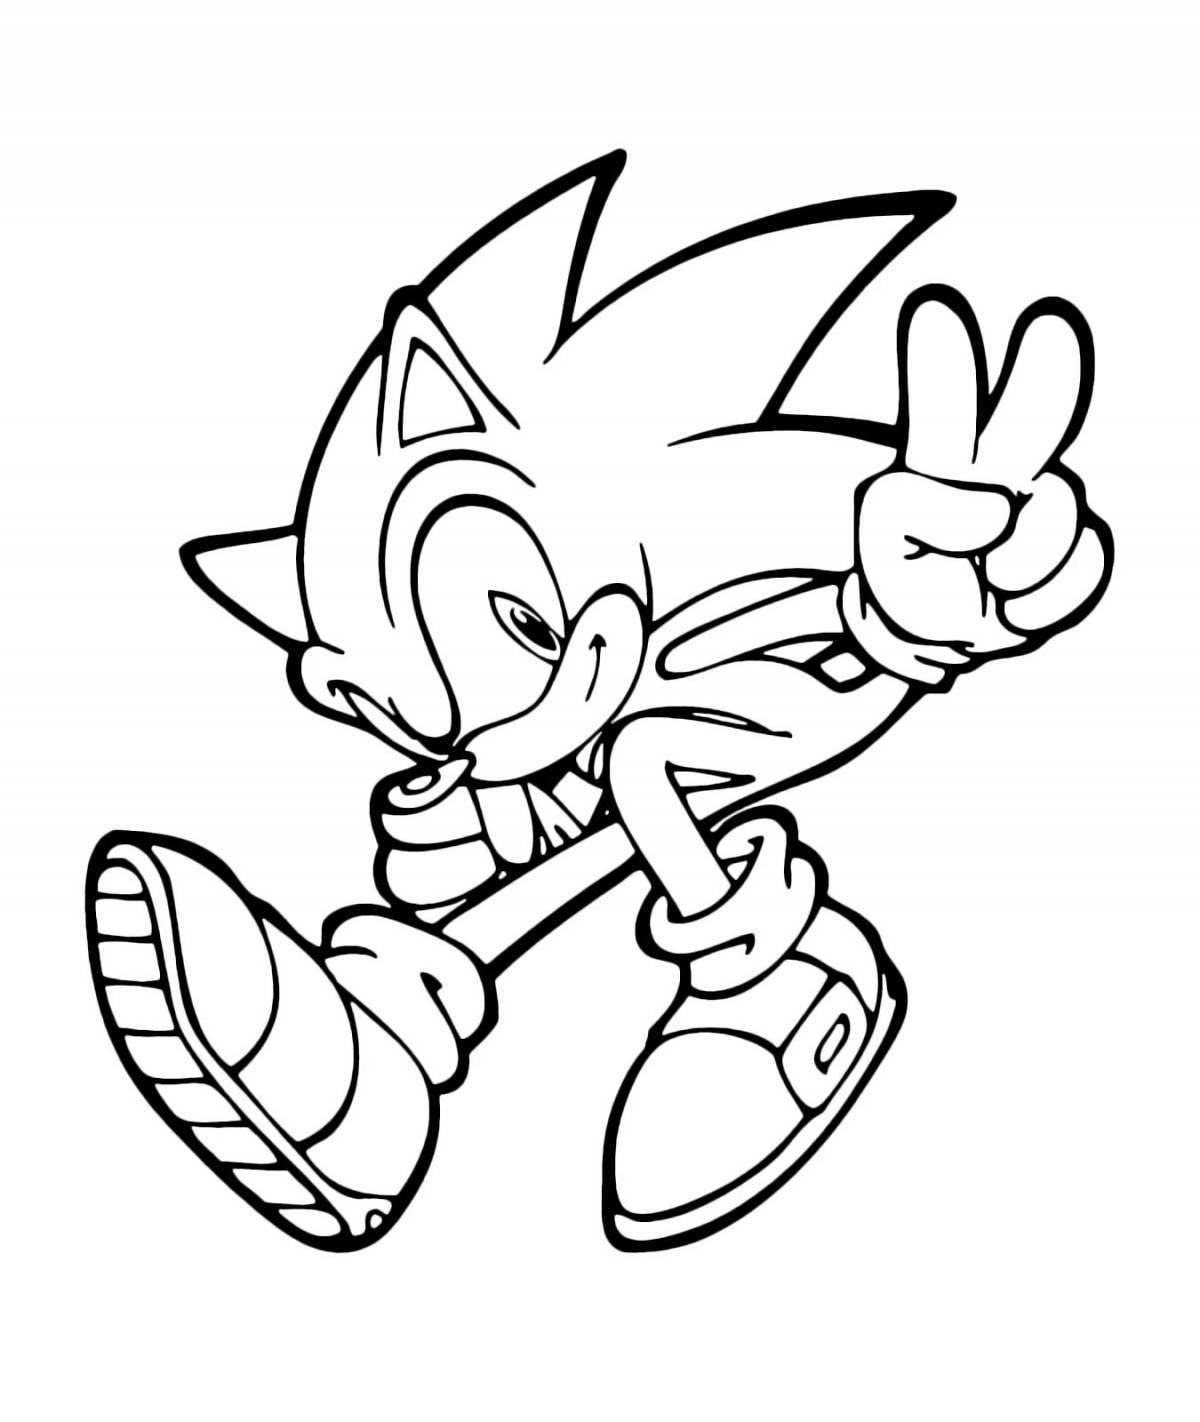 Amazing hyper sonic coloring page